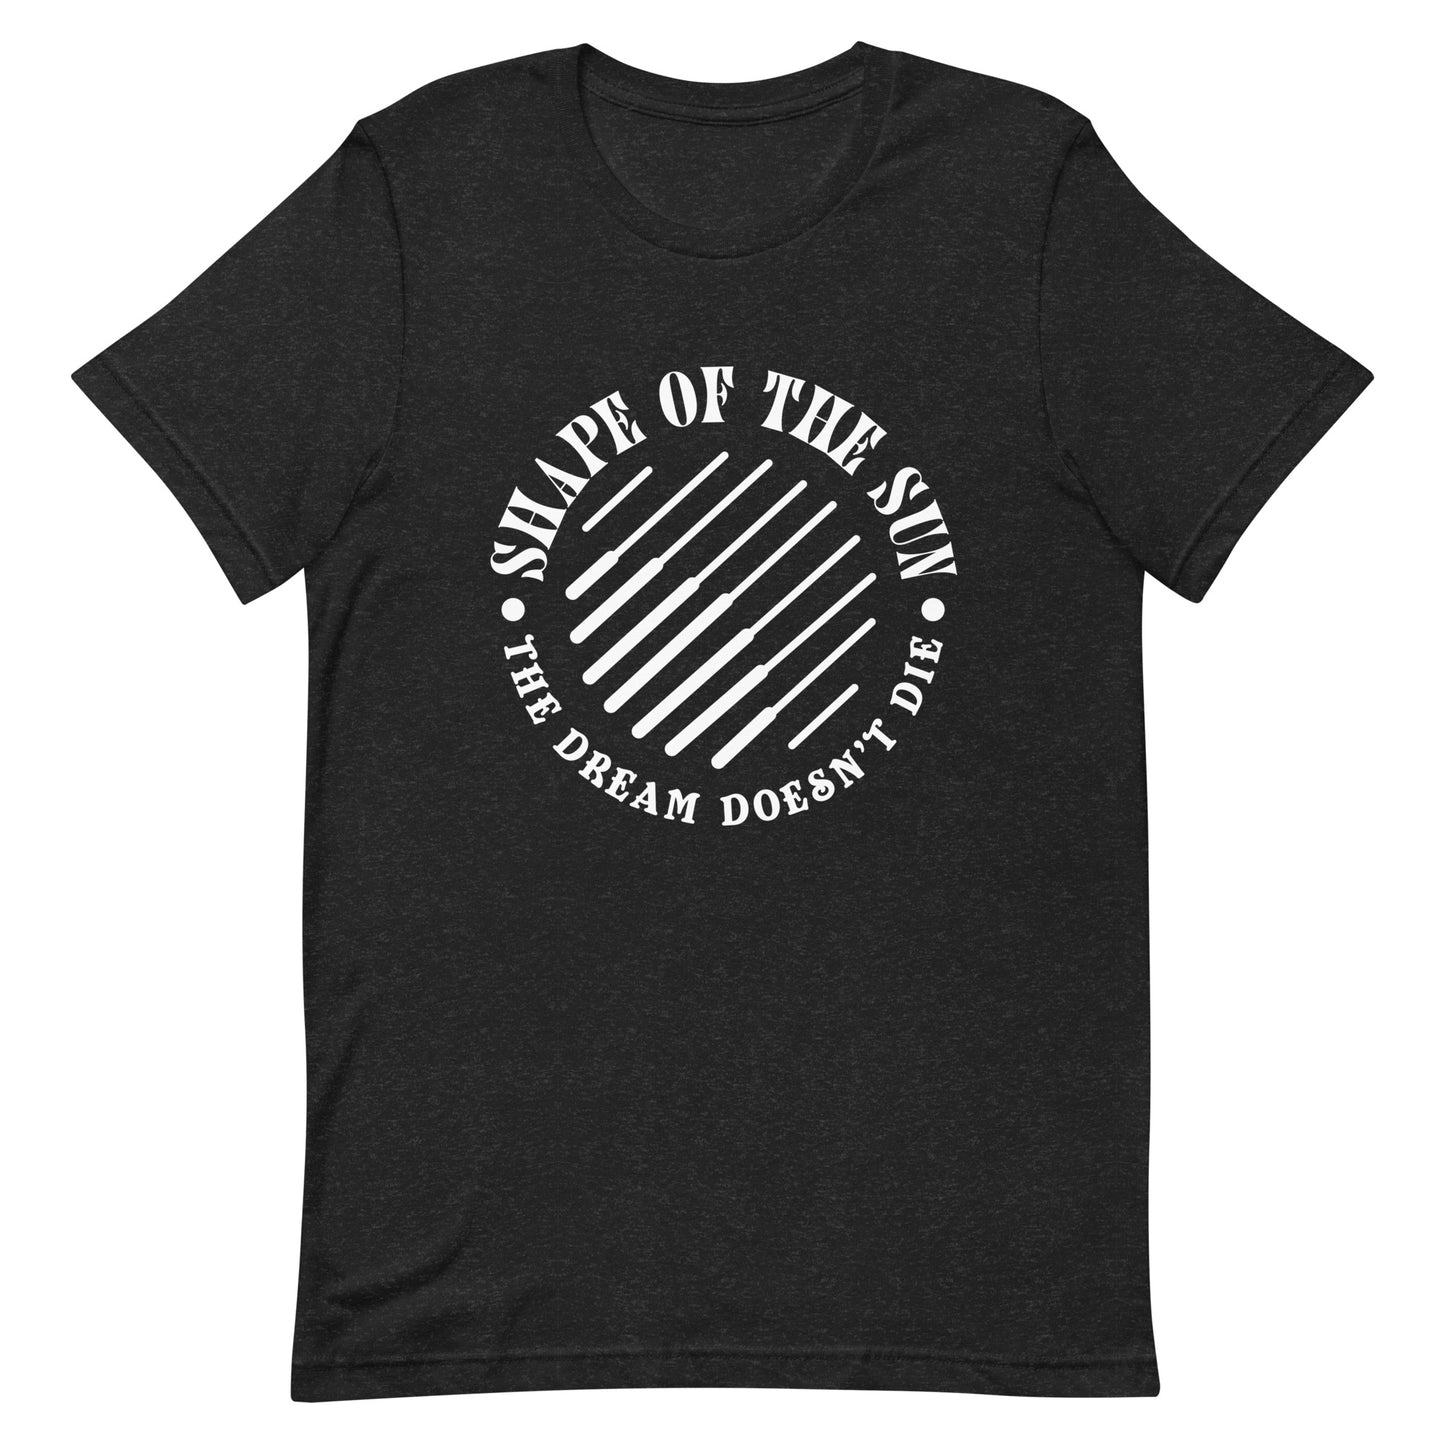 The Dream Doesn't Die - T-Shirt